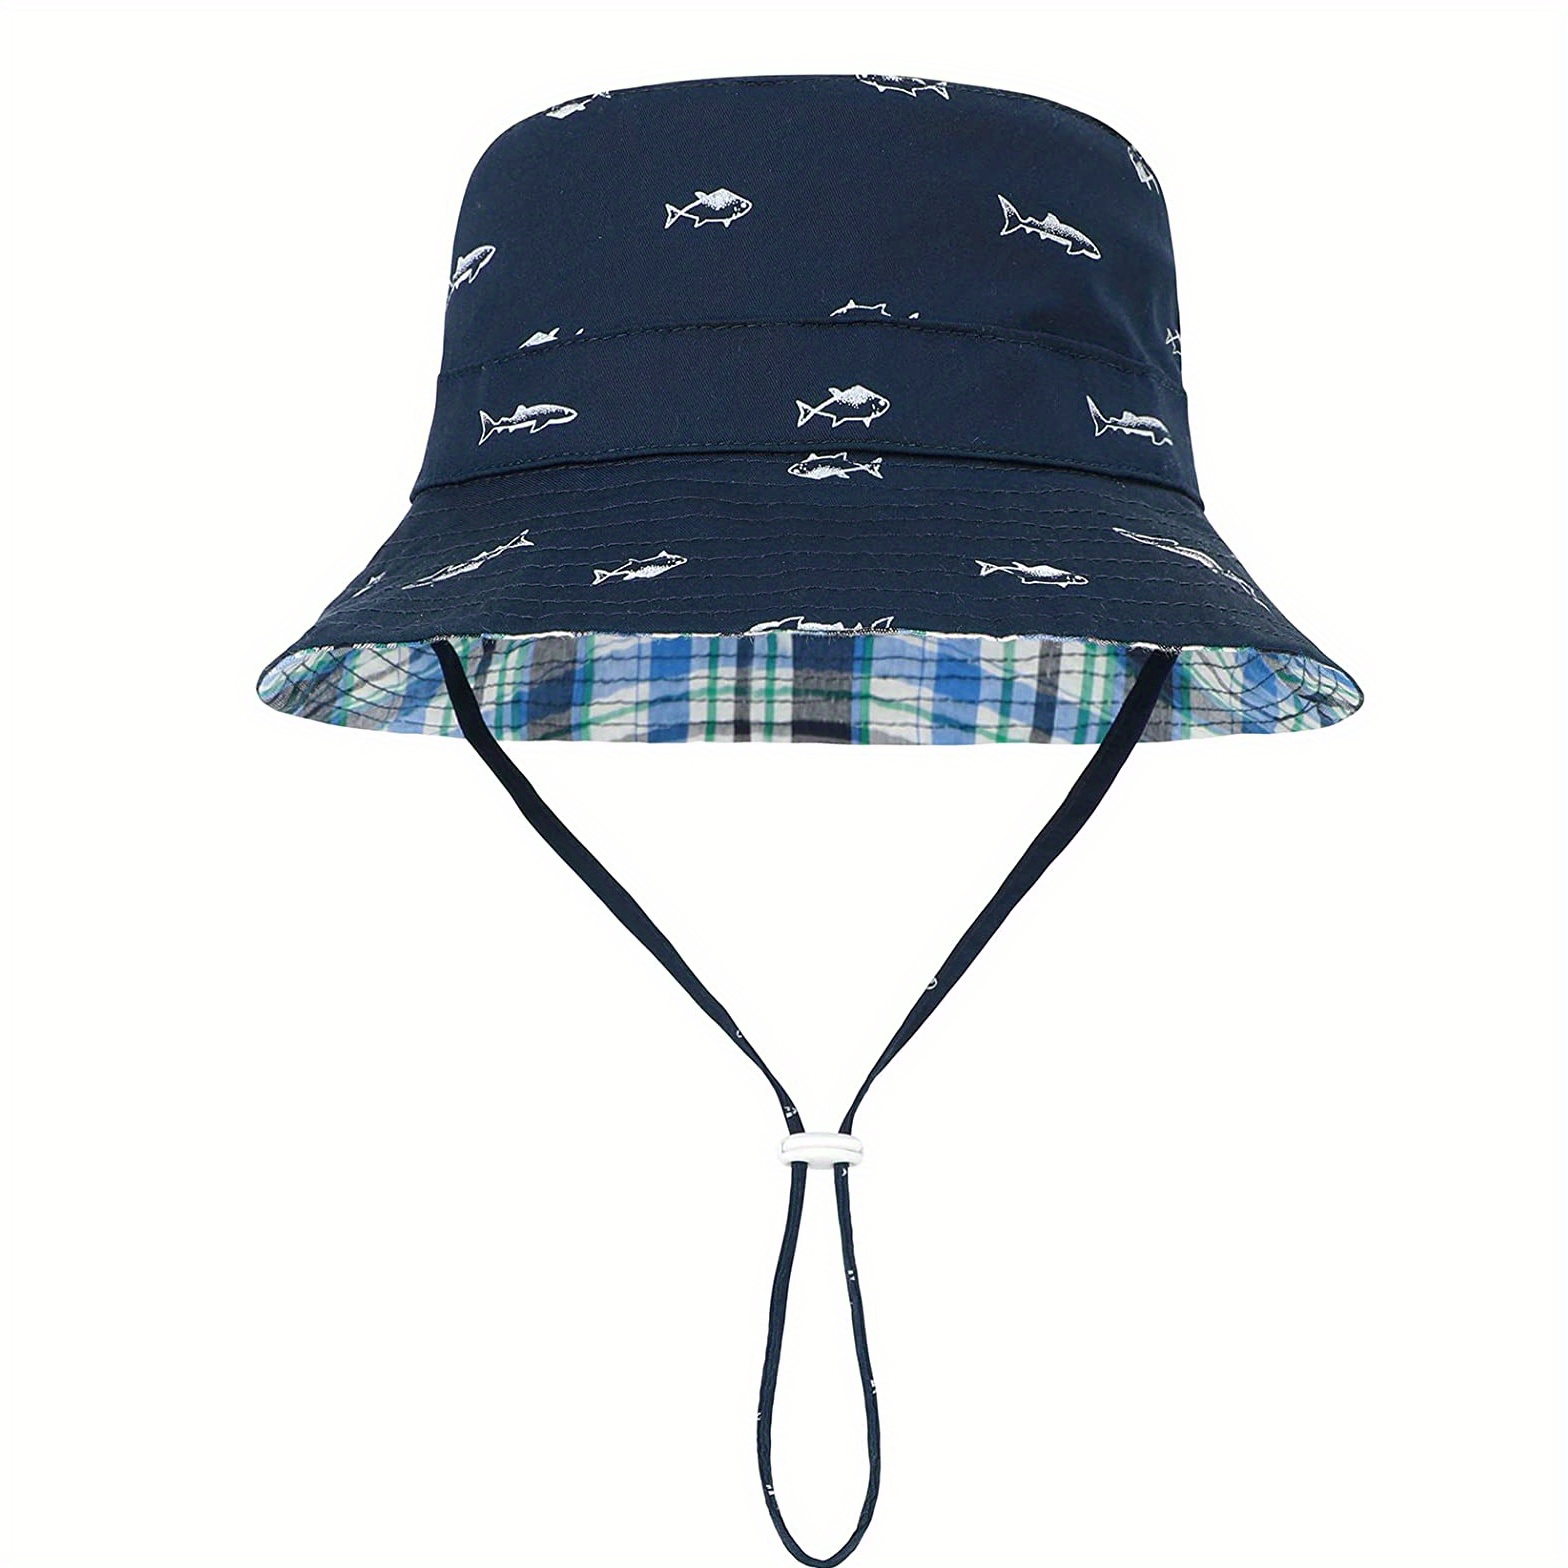 Red White and Blue Patriotic Bucket Hat for Men Women, Funny Summer Beach  Fishing Hat, Packable Outdoor Sun Fisherman Hat